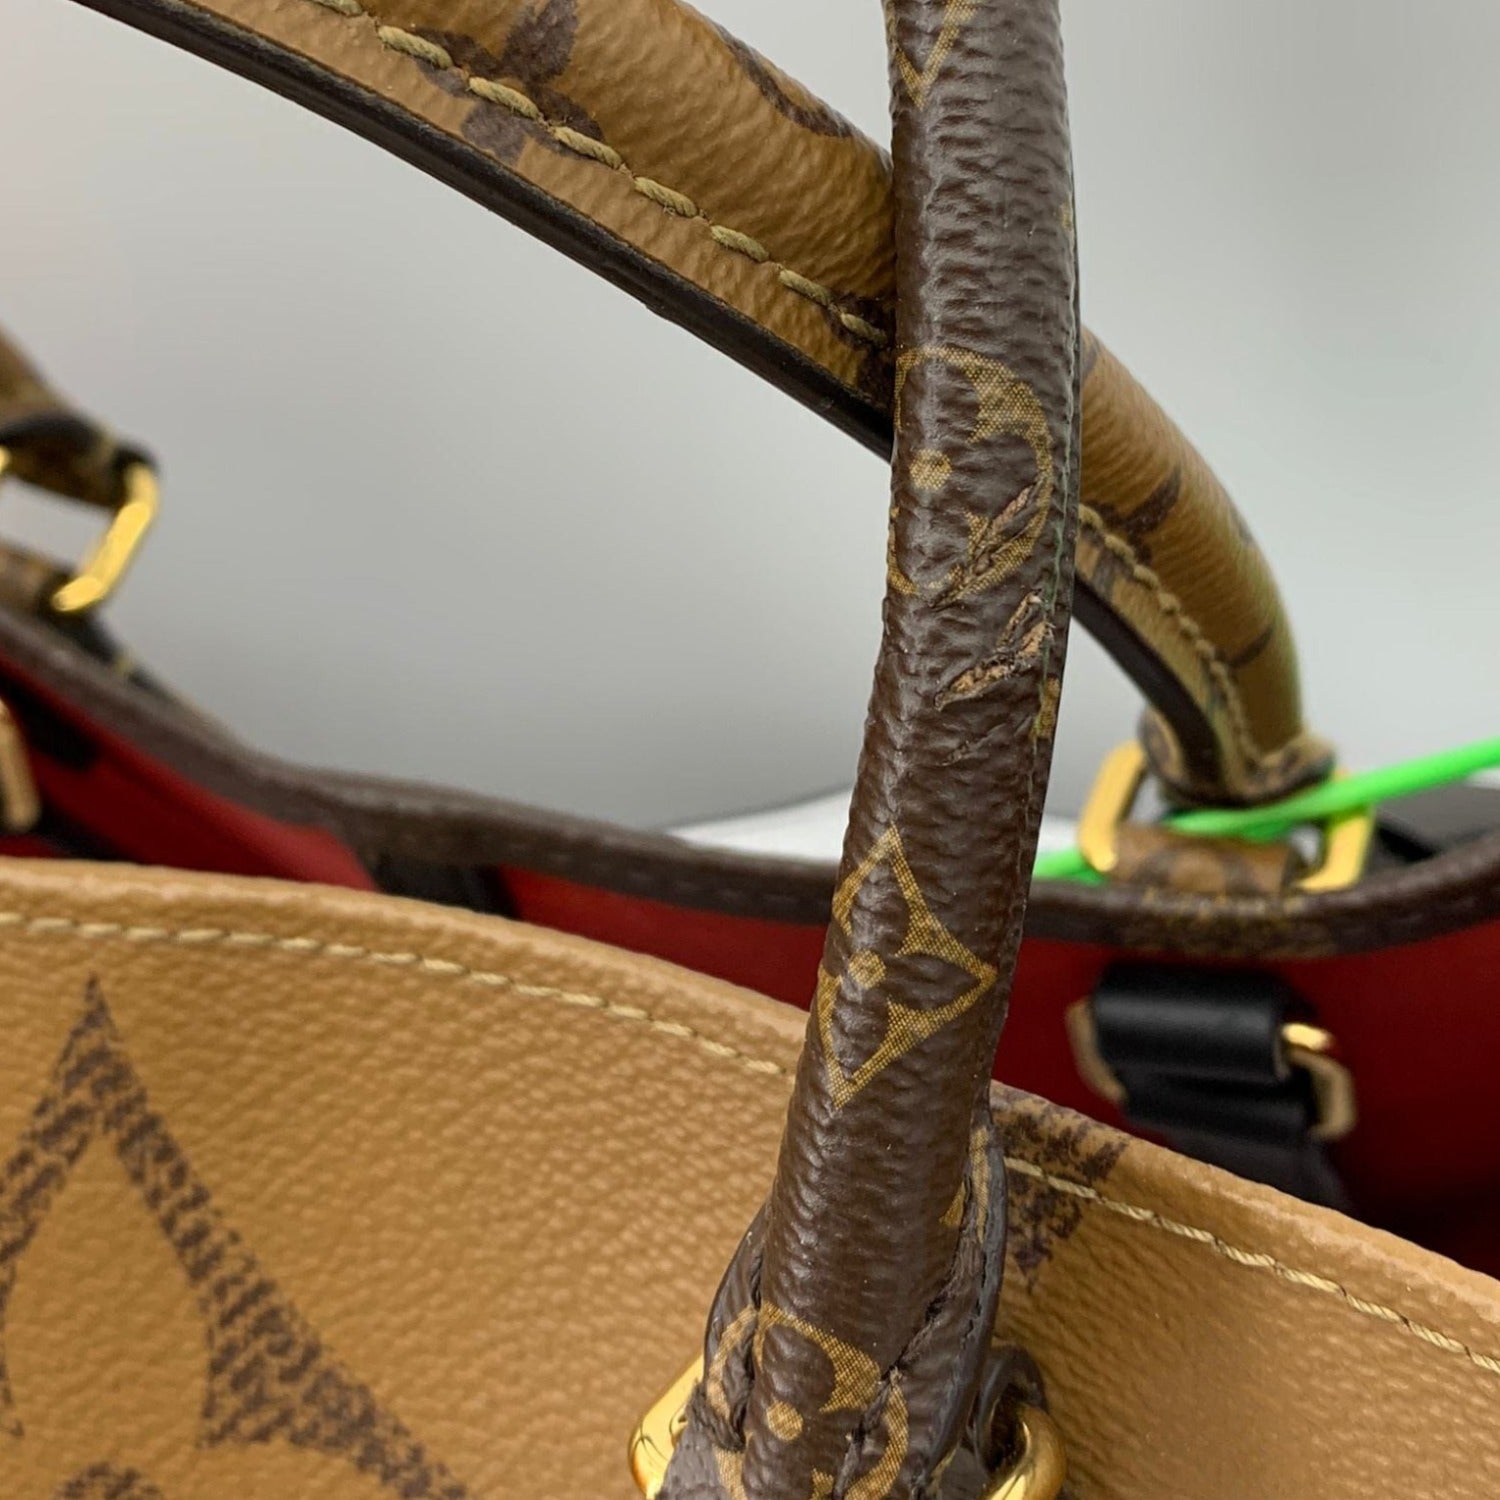 louis vuitton on the go tote bag